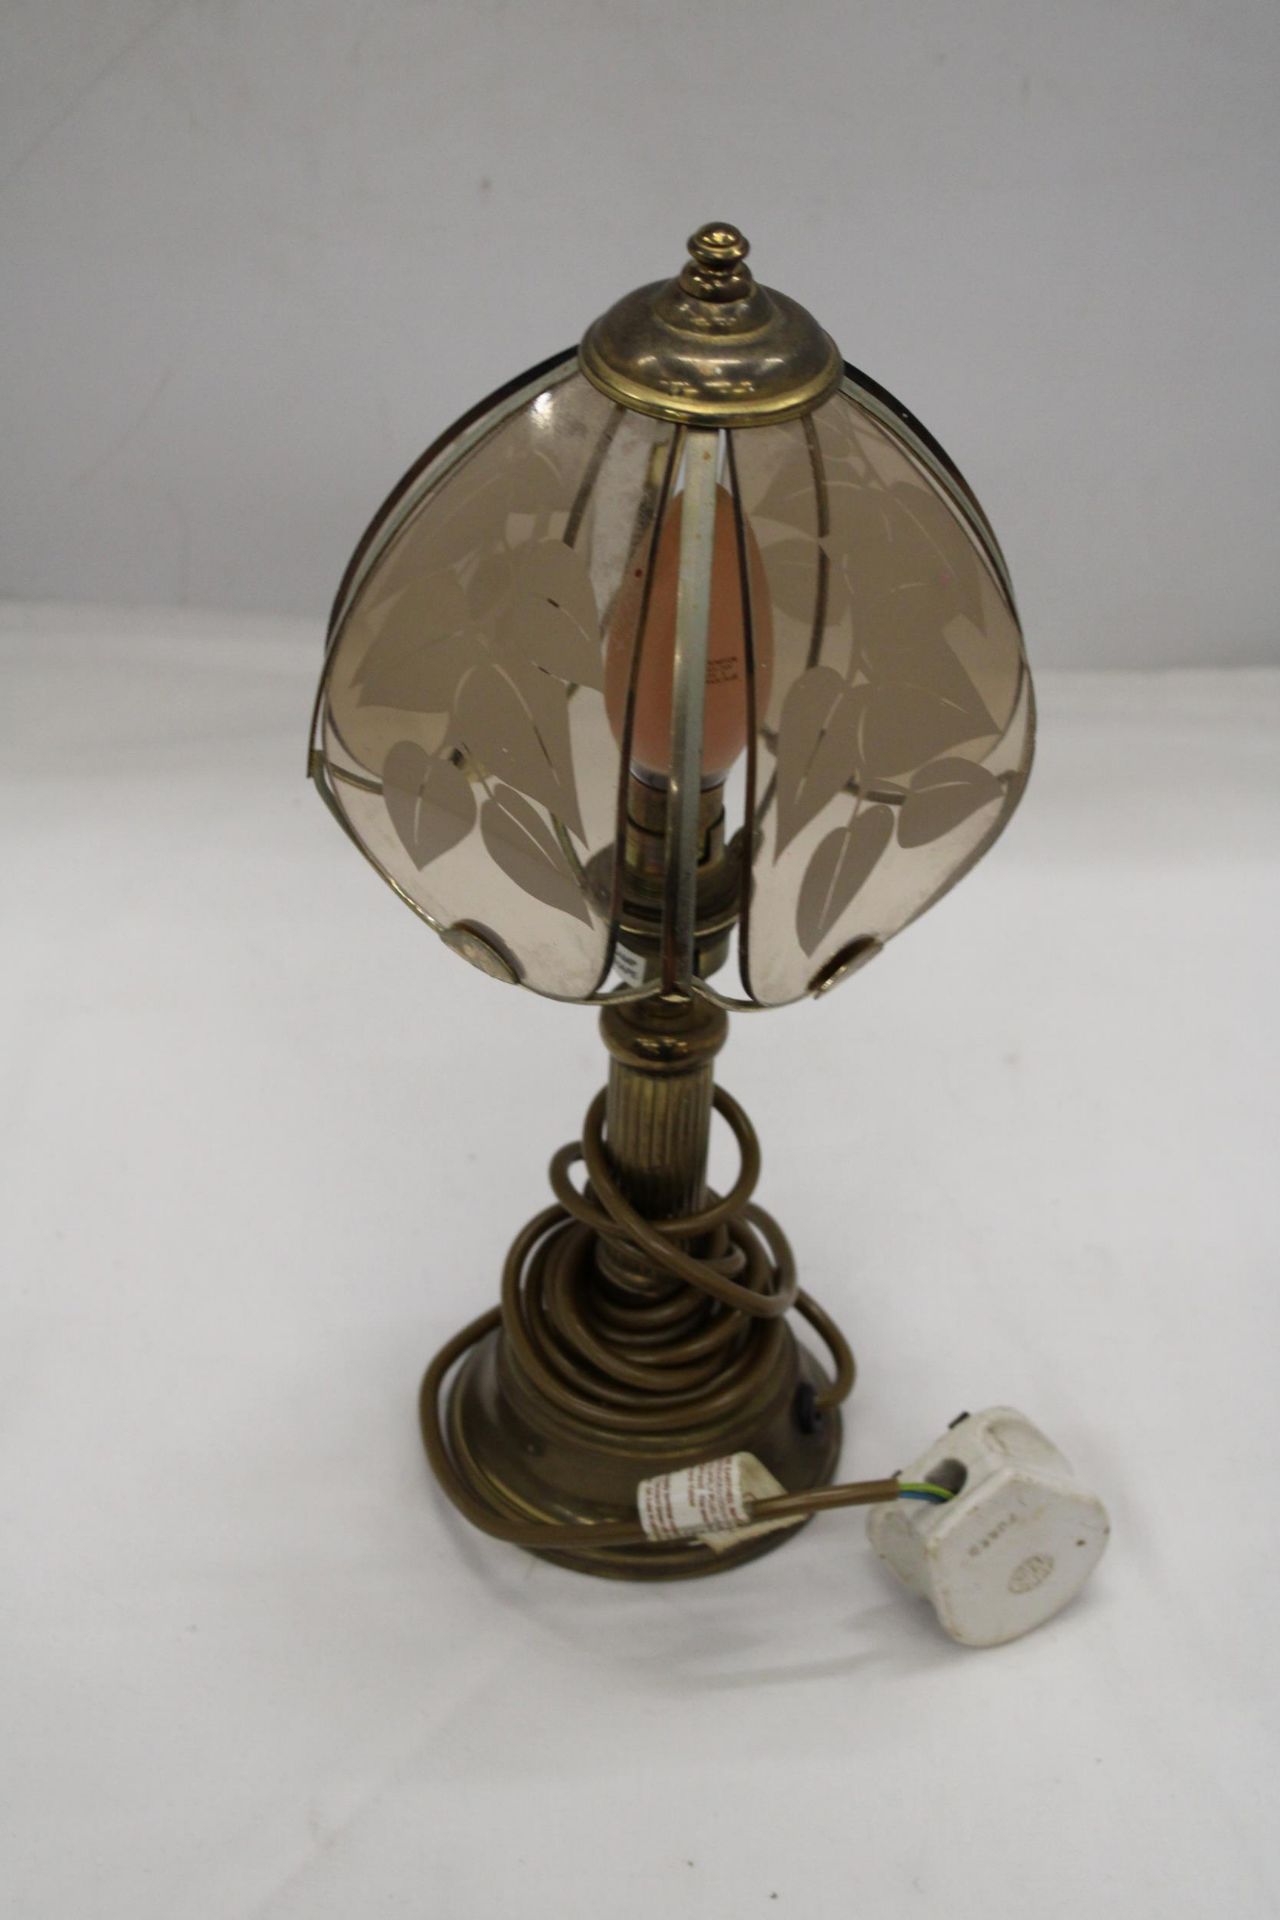 A VINTAGE STYLE, BRASS TABLE LAMP, WITH COLUMN BASE AND A GLASS SHADE, HEIGHT 36CM